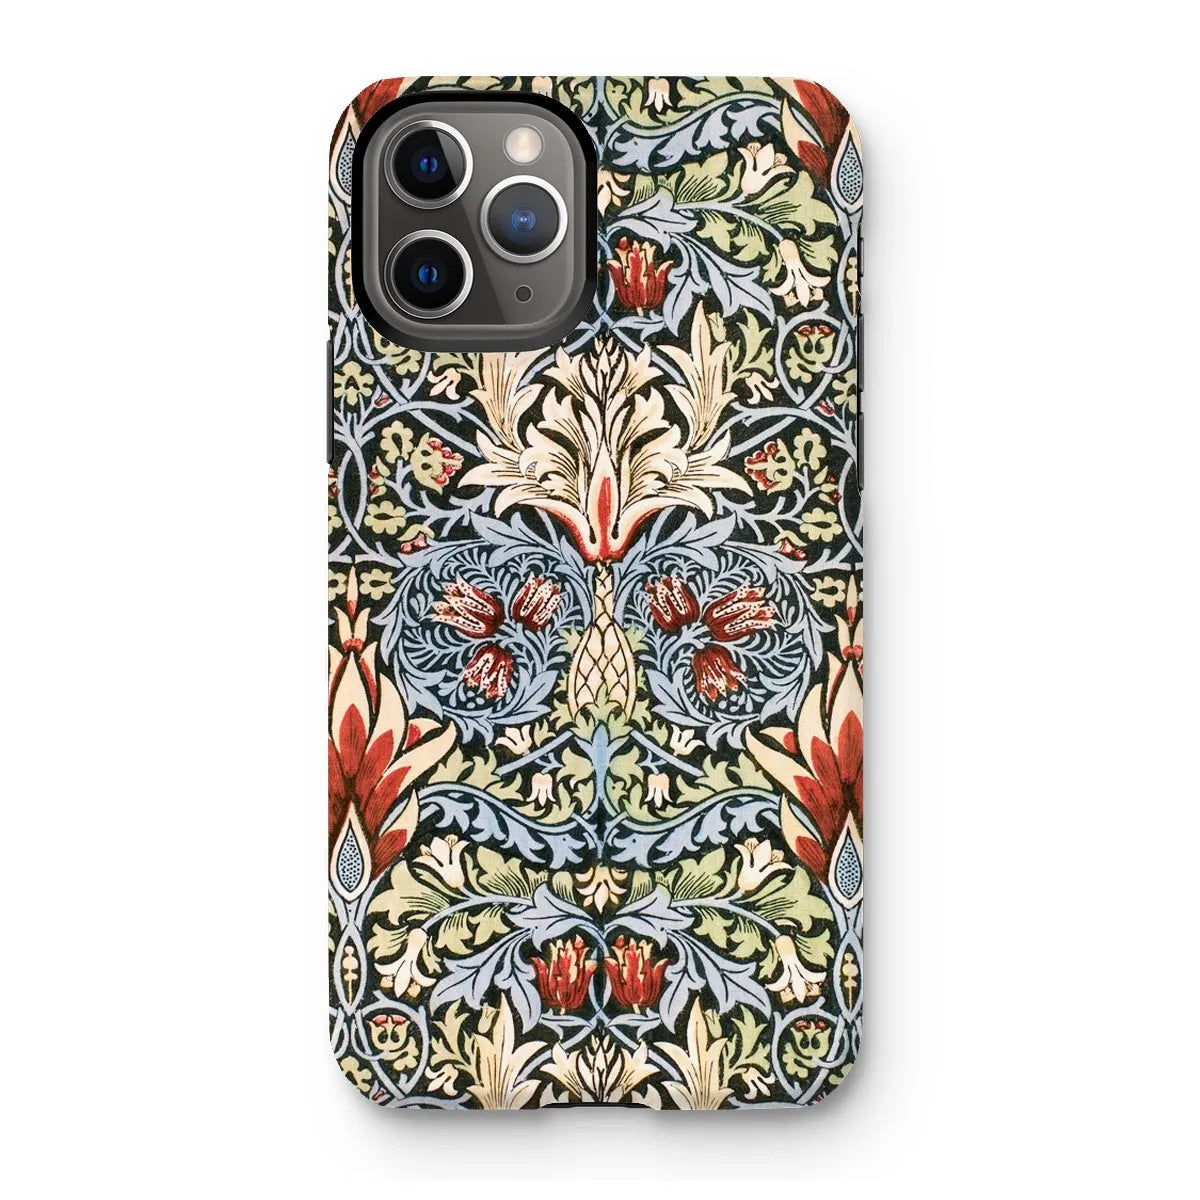 Snakeshead - Arts And Crafts Pattern Phone Case - William Morris - Iphone 11 Pro / Matte - Mobile Phone Cases